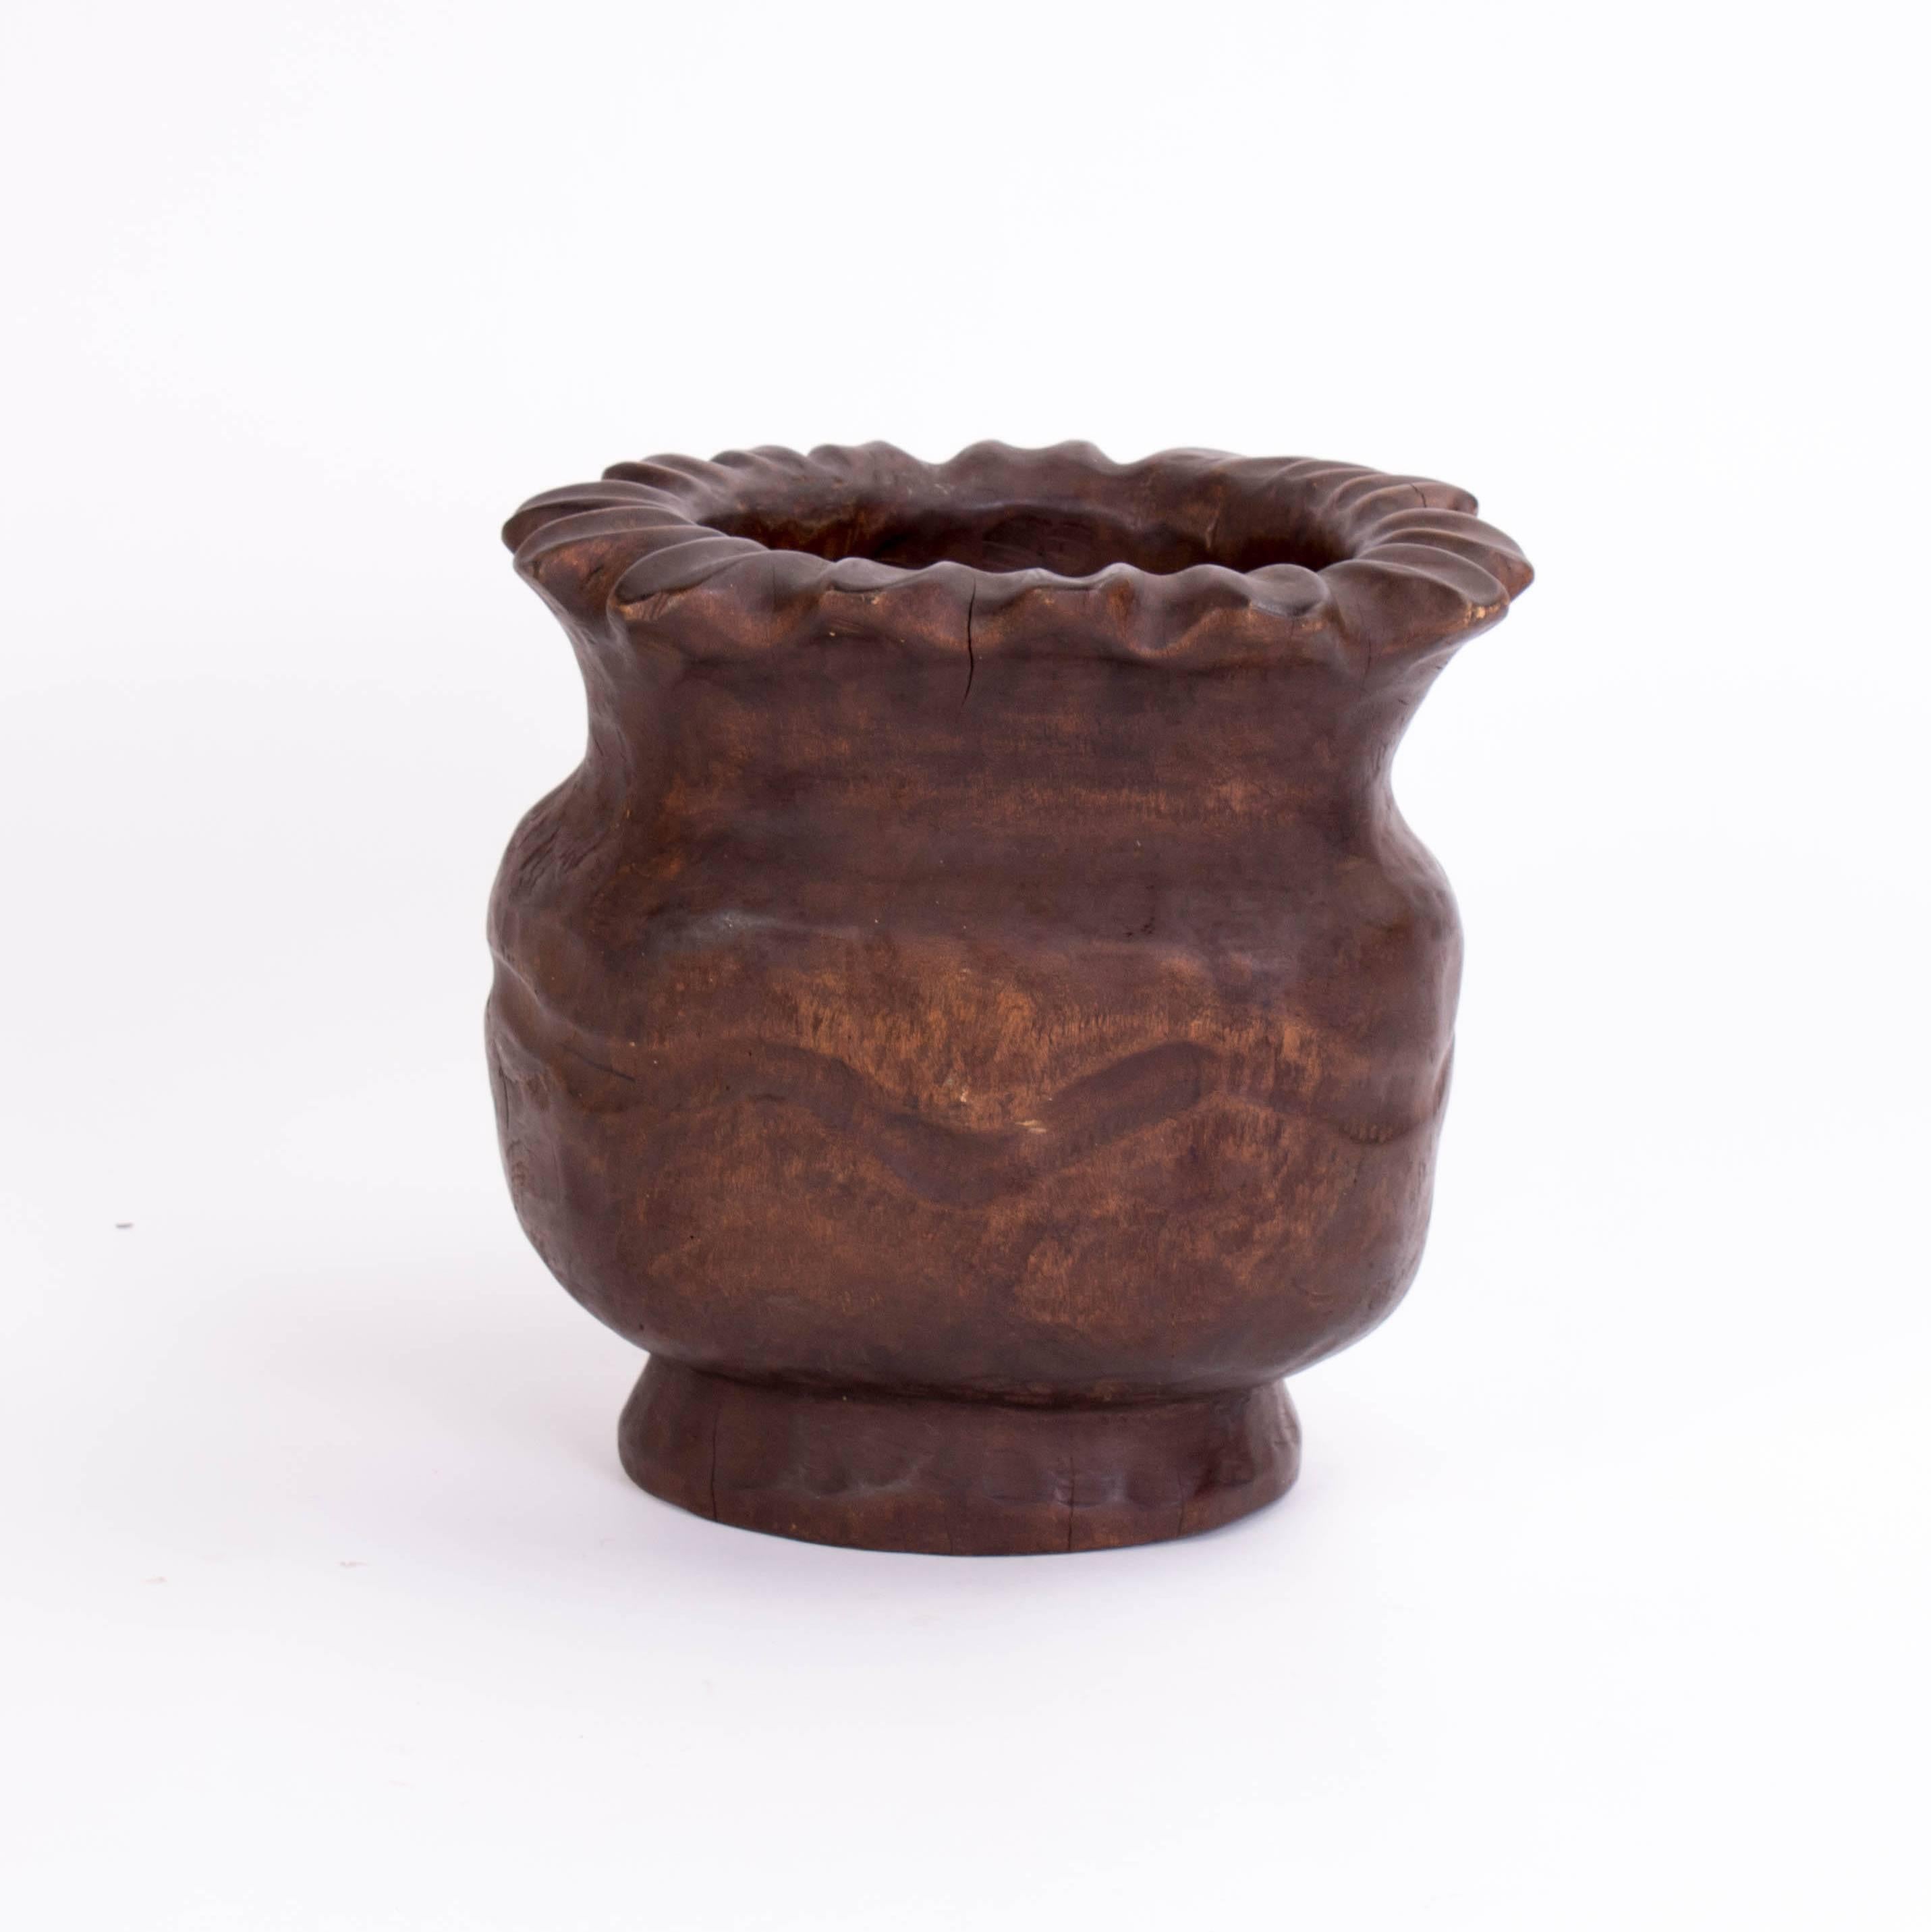 Wood carved poppy seed pod planter with small cracks on the base and the rim.